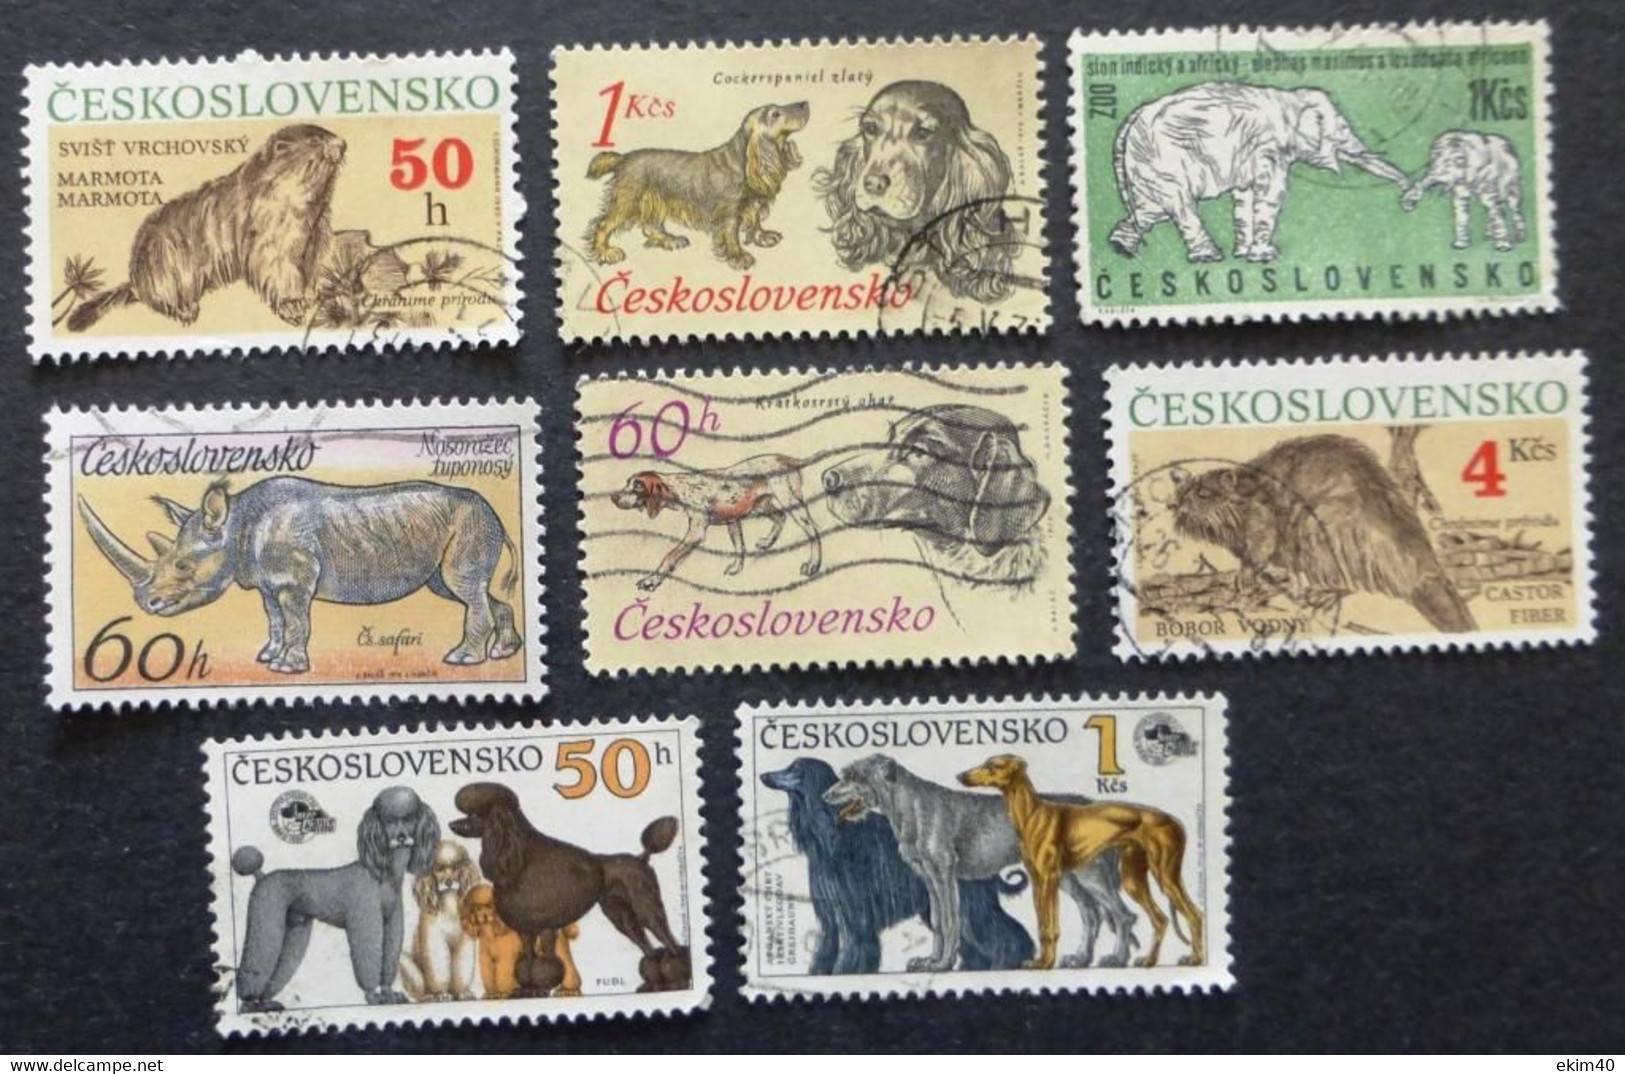 Selection Of Used/Cancelled Stamps From Czechoslovakia Wild & Domestic Animals. No DC-354 - Gebruikt